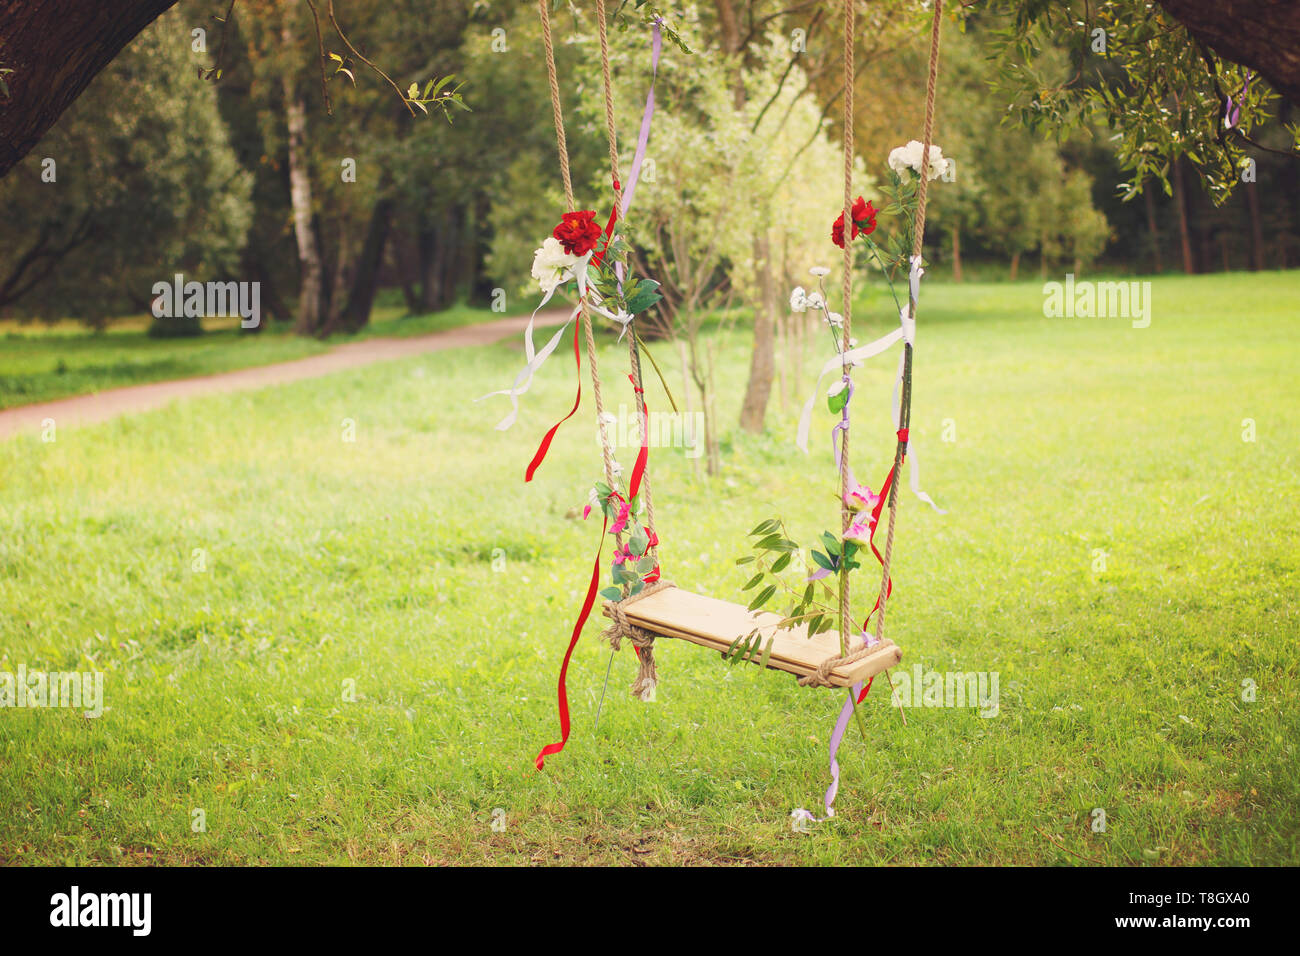 Swings decorated with ribbons and flowers hanging on a tree in a summer park Stock Photo